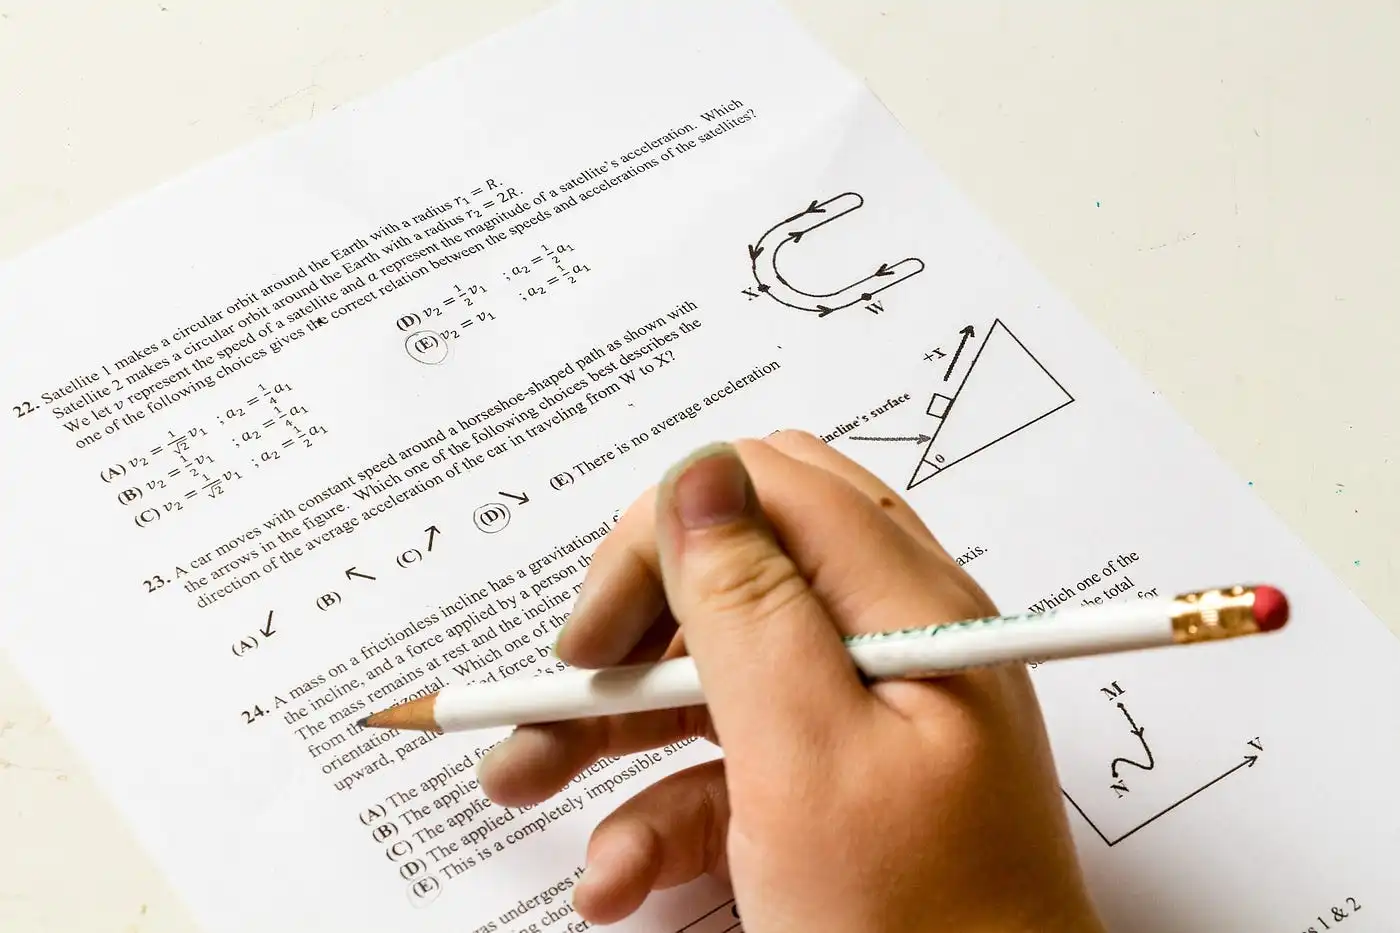 How To Ace Physics Examination in Class 11